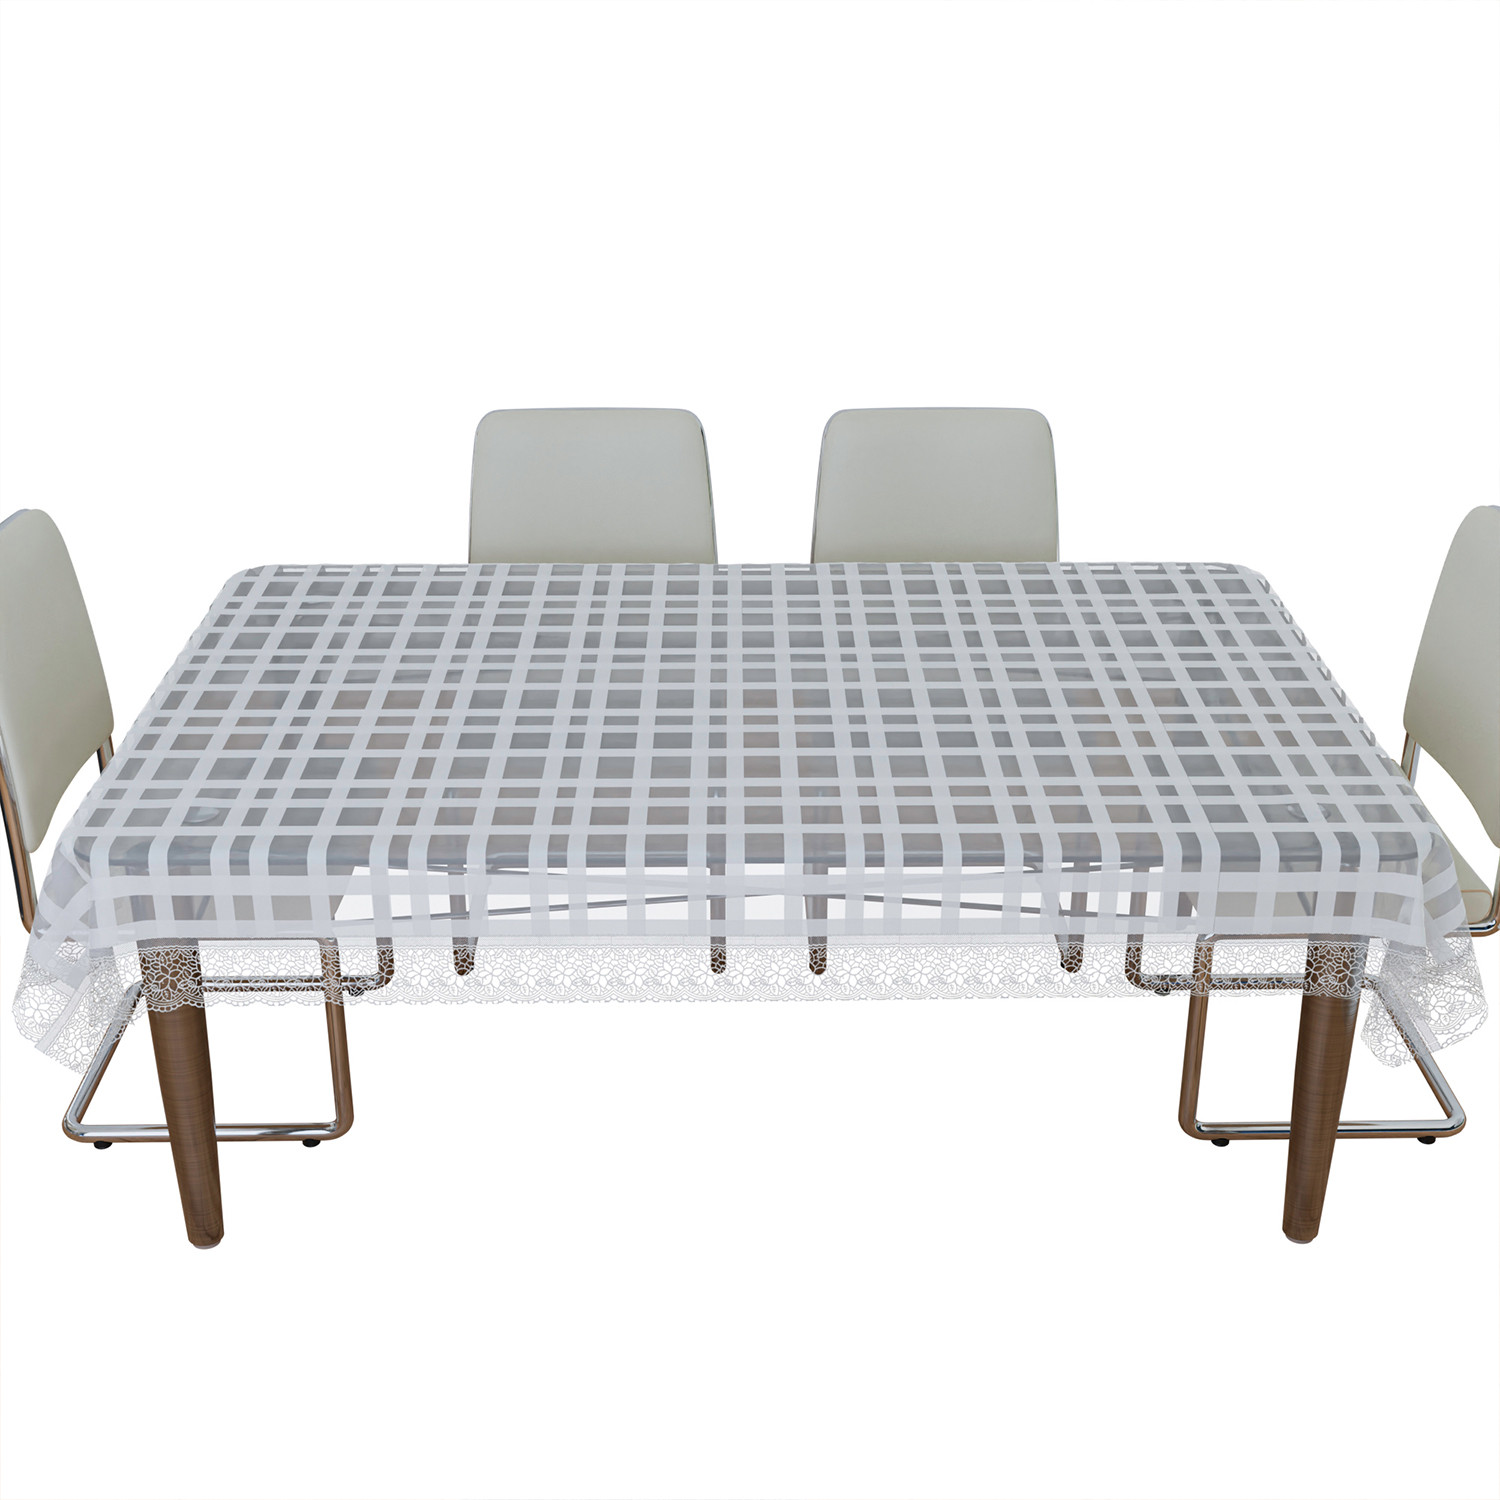 Kuber Industries Dining Table Cover | PVC Table Cloth Cover | 6 Seater Table Cloth | Self Check Table Cover | Table Protector | Table Cover for Dining Table | 60x90 Inch | DTC | White